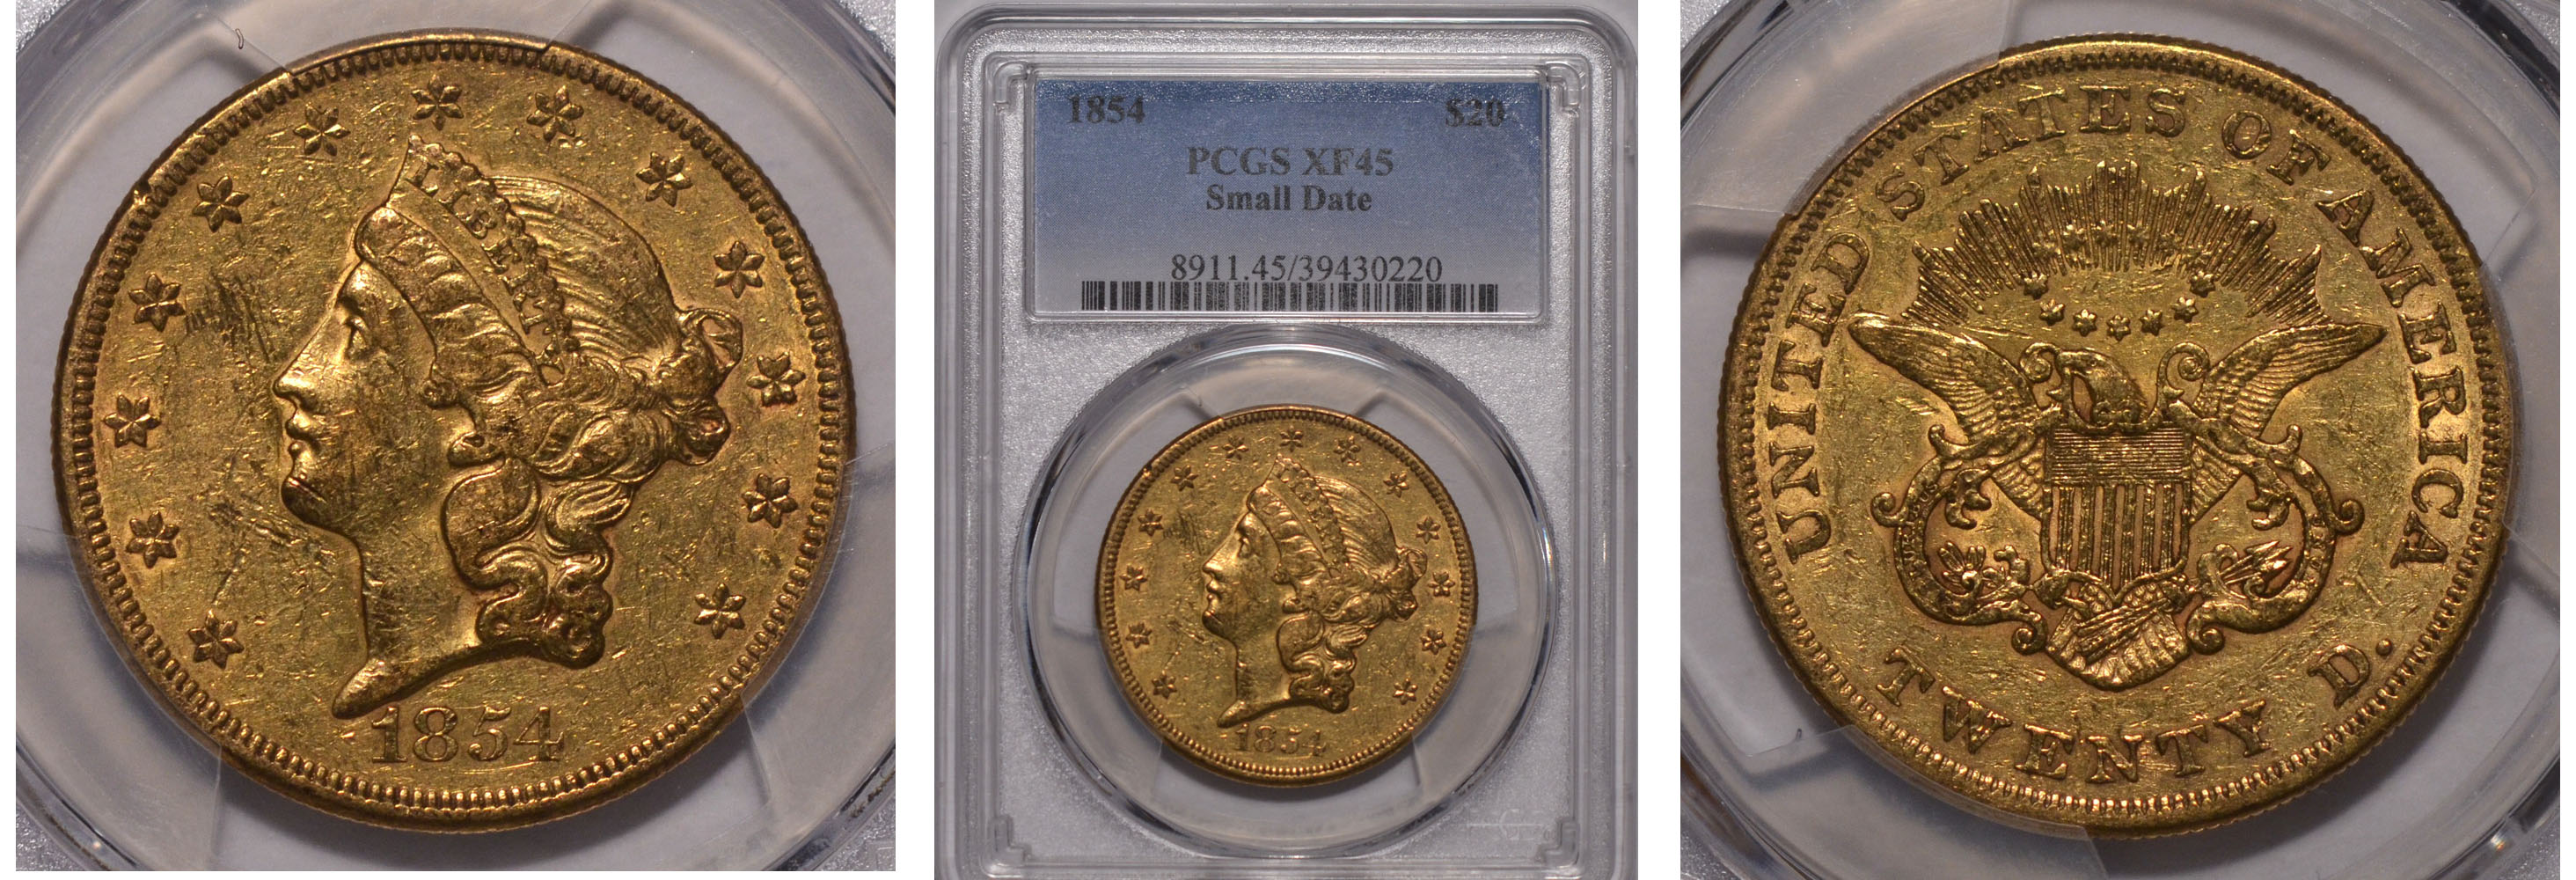 1854 Small Date $20 PCGS XF45